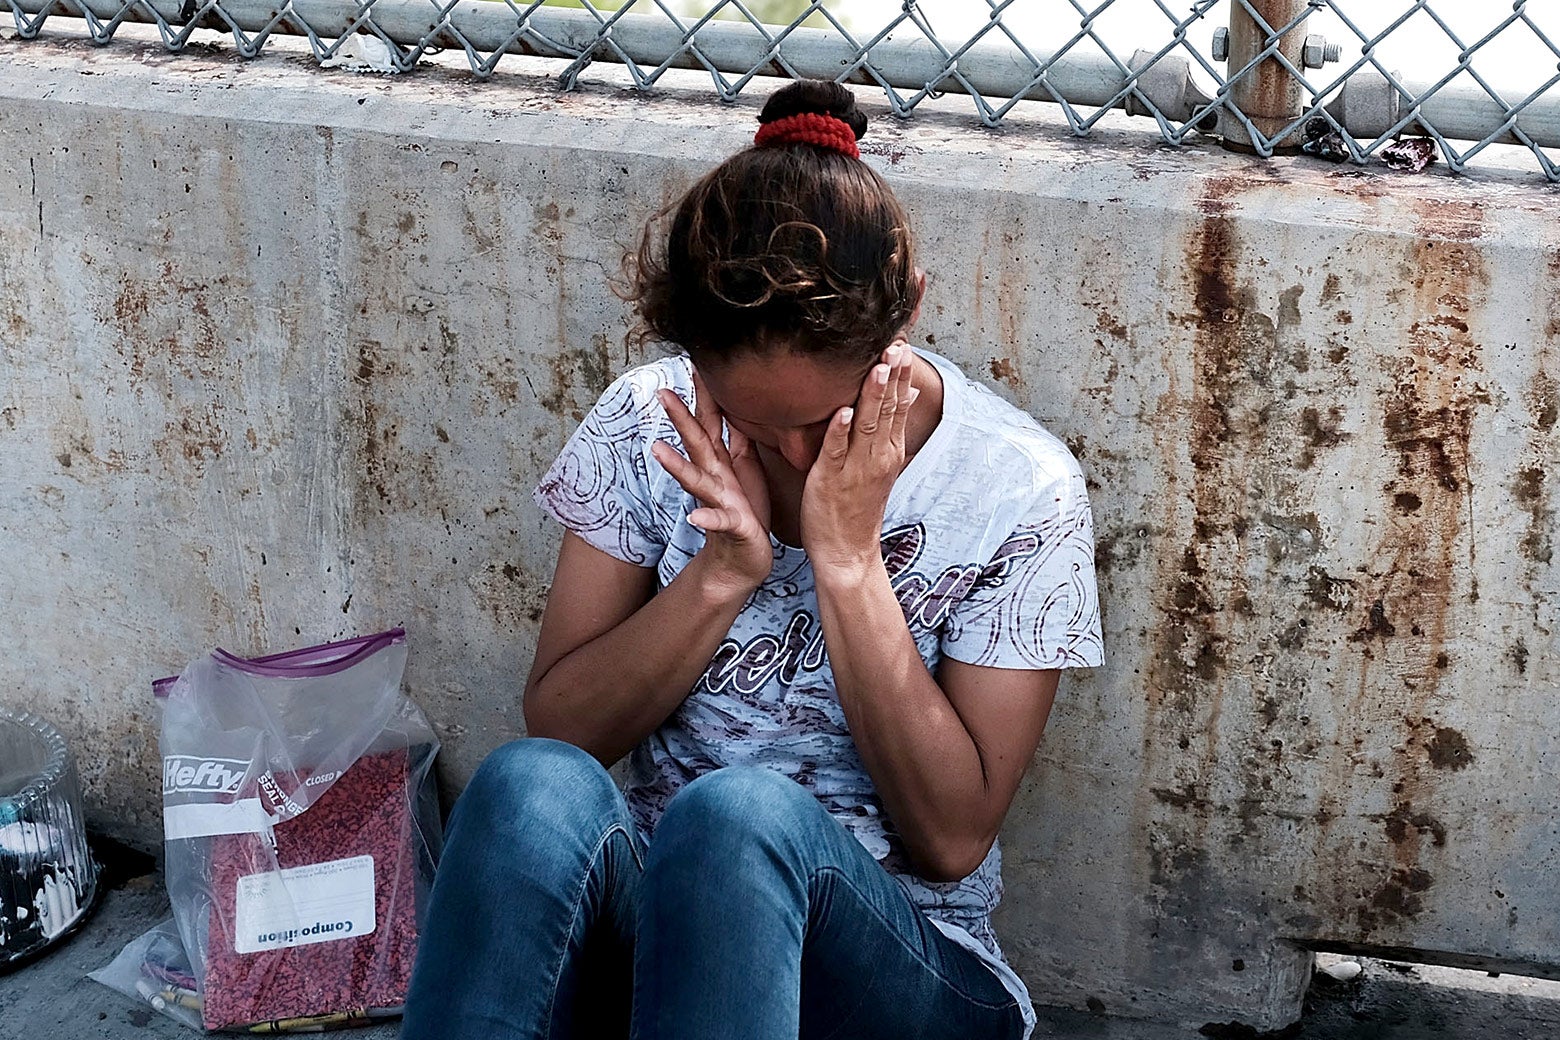 A Honduran woman, fleeing poverty and violence in her home country, waits along the border bridge after being denied entry into the U.S. from Mexico on June 25, 2018 in Brownsville, Texas.